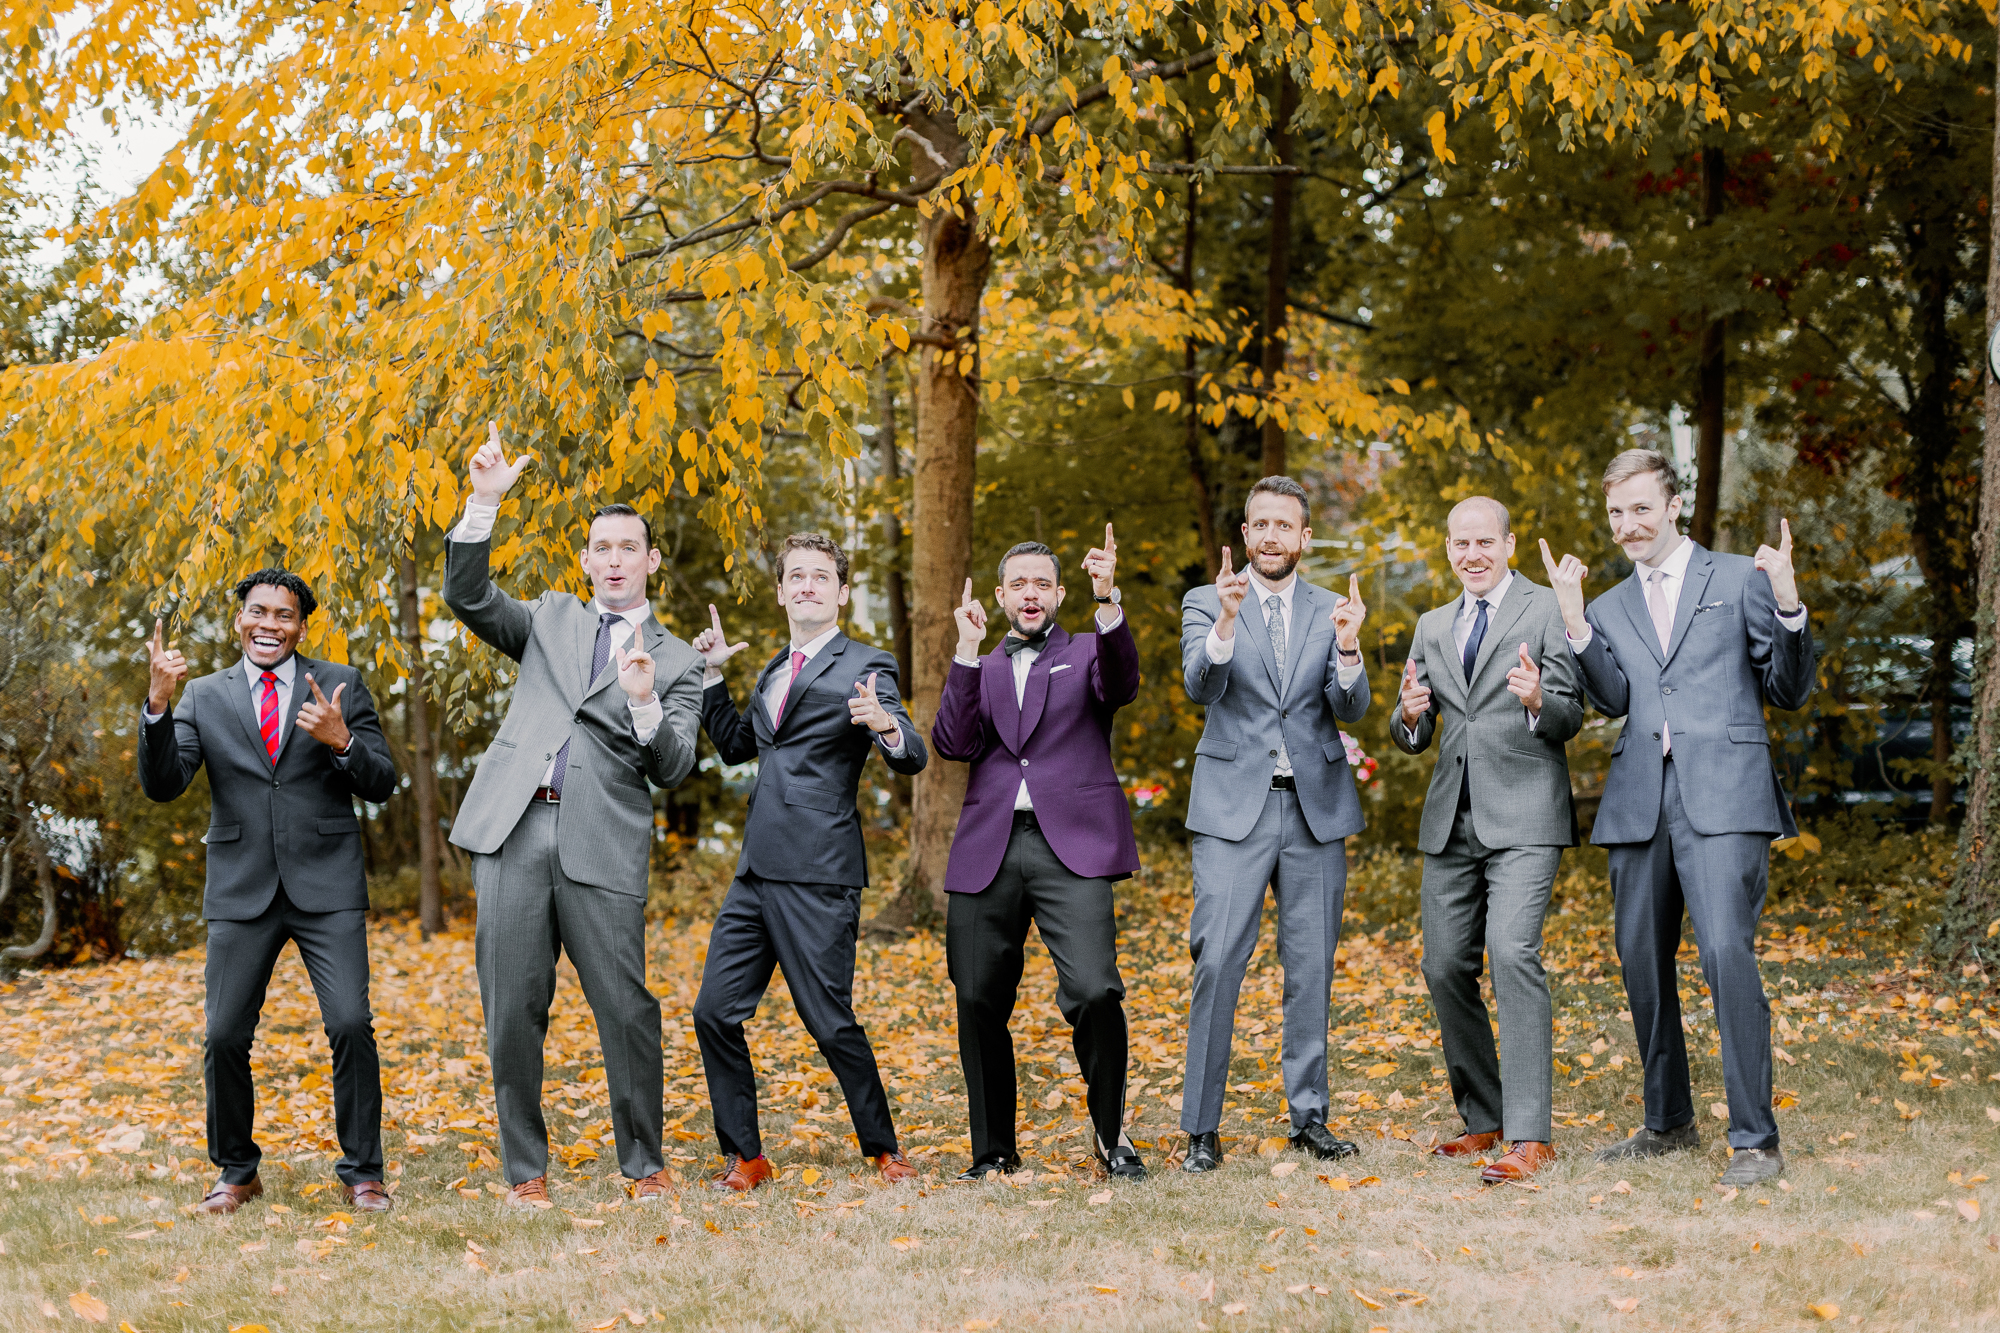 Fall bridal party photos in upstate New York